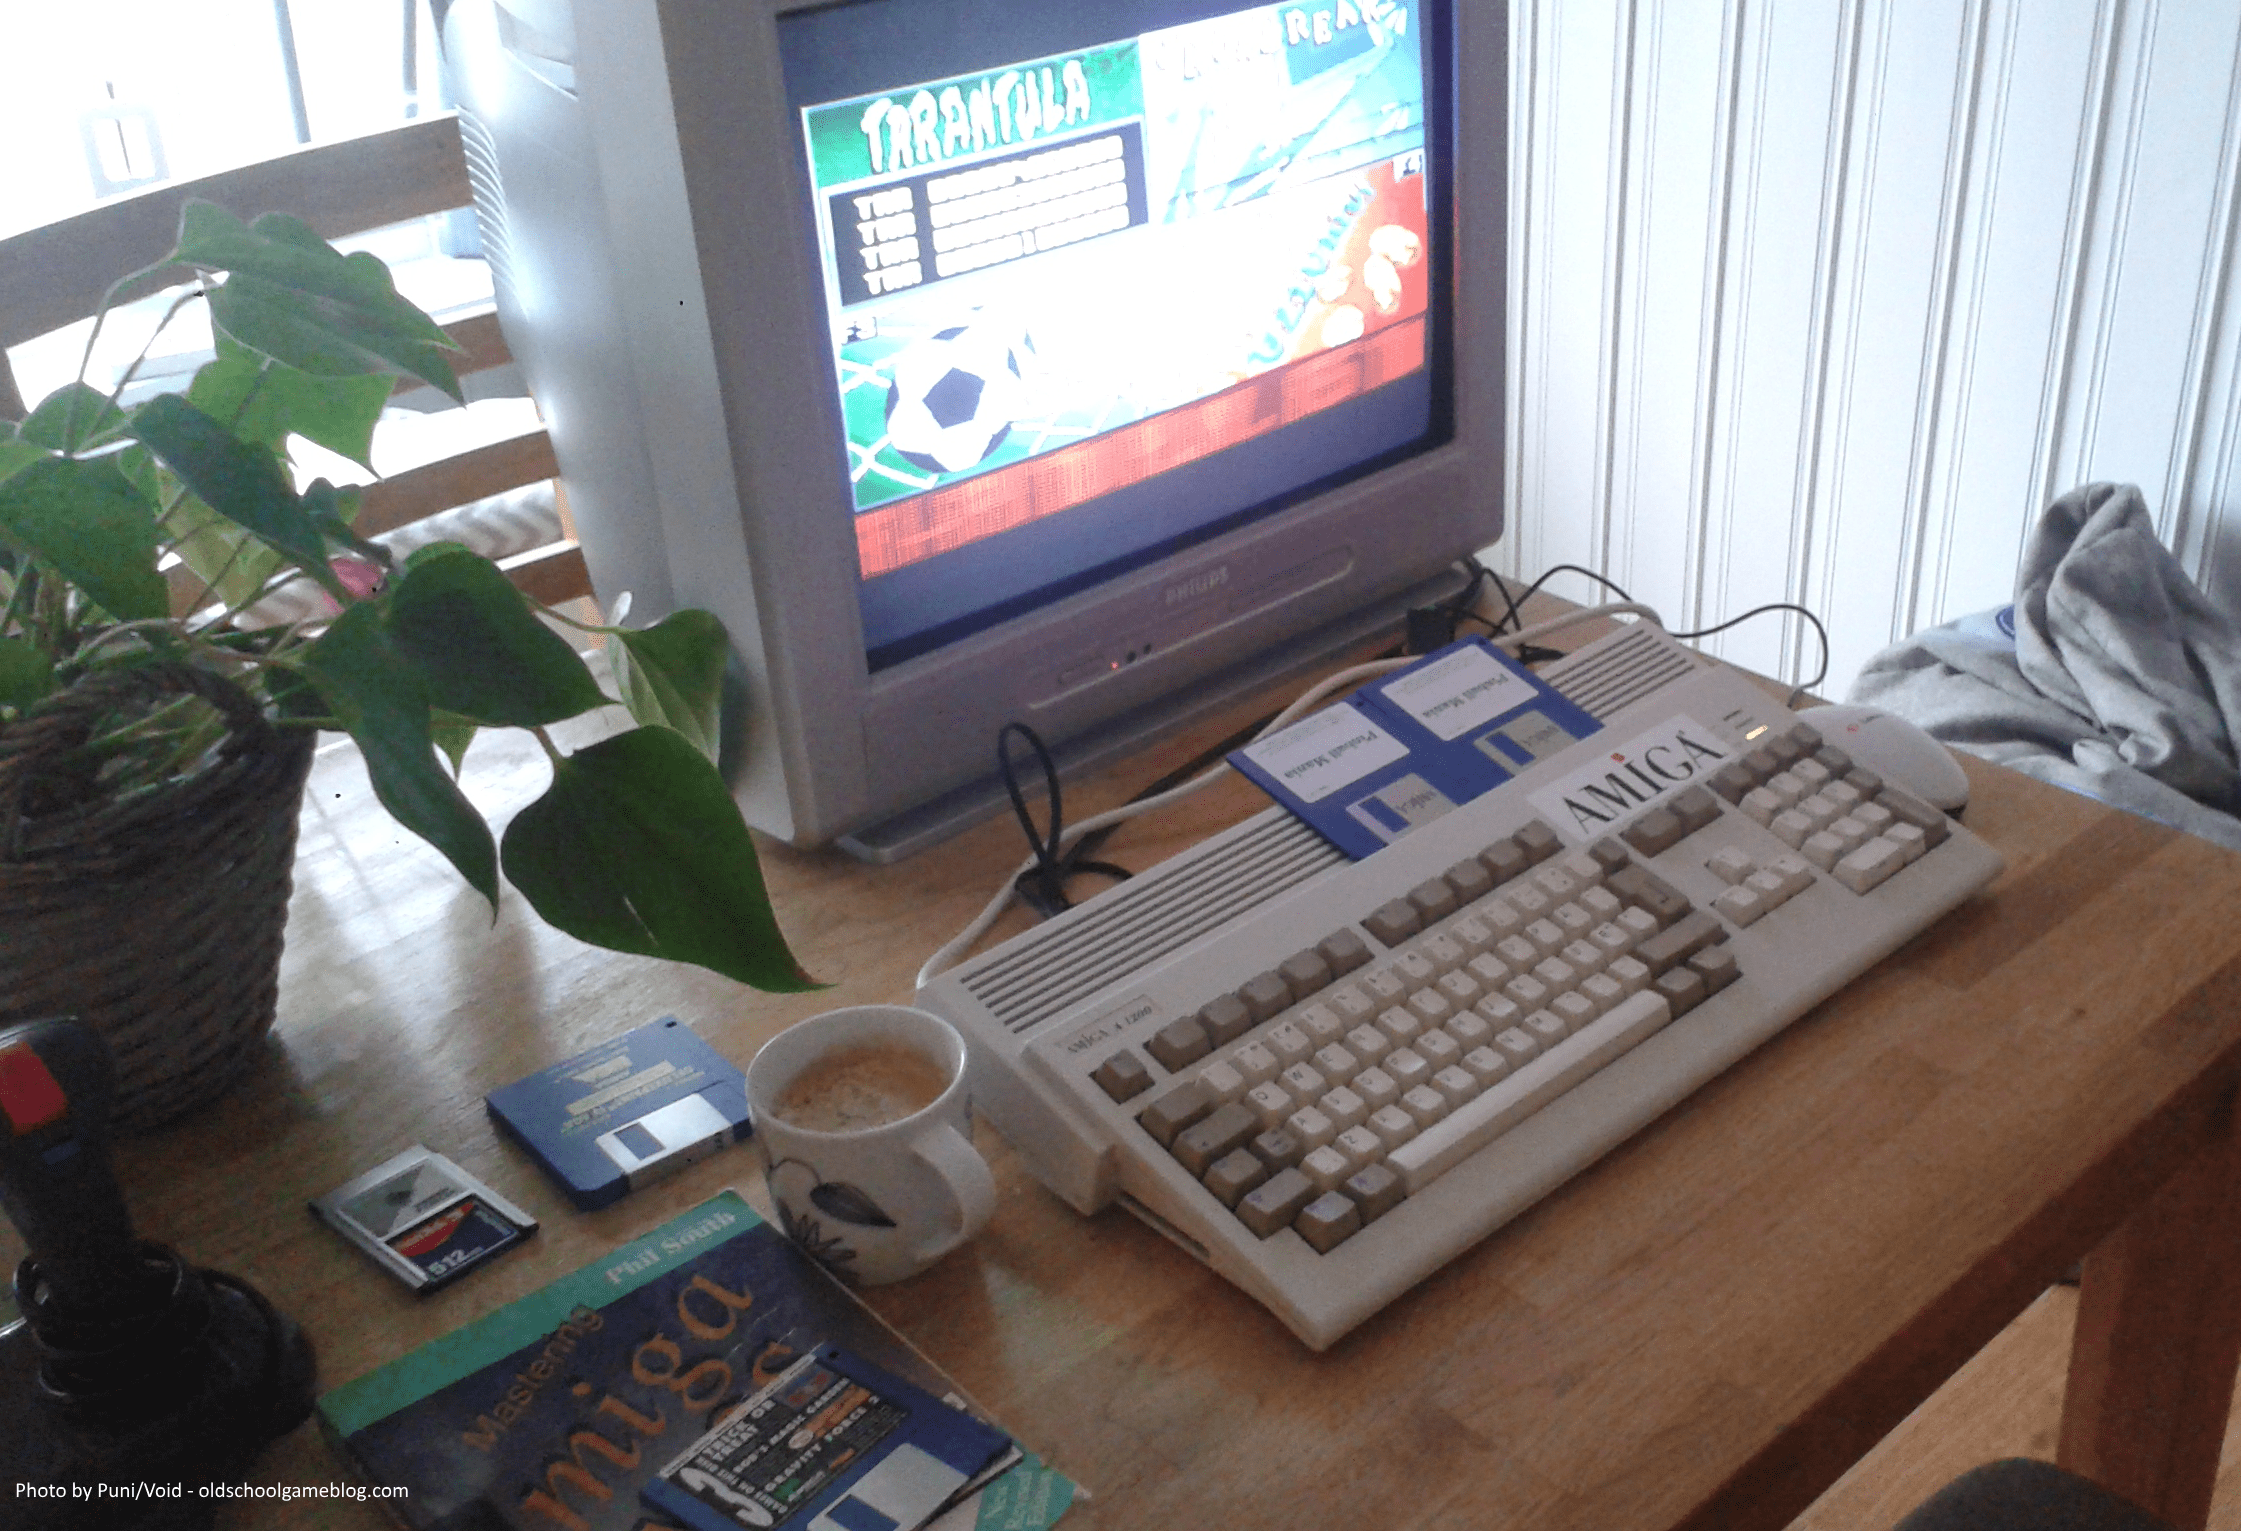 Photo of my Amiga 1200 in action running Pinball Mania. You can also see Phil South's excellent AMOS book on the left hand side. :)